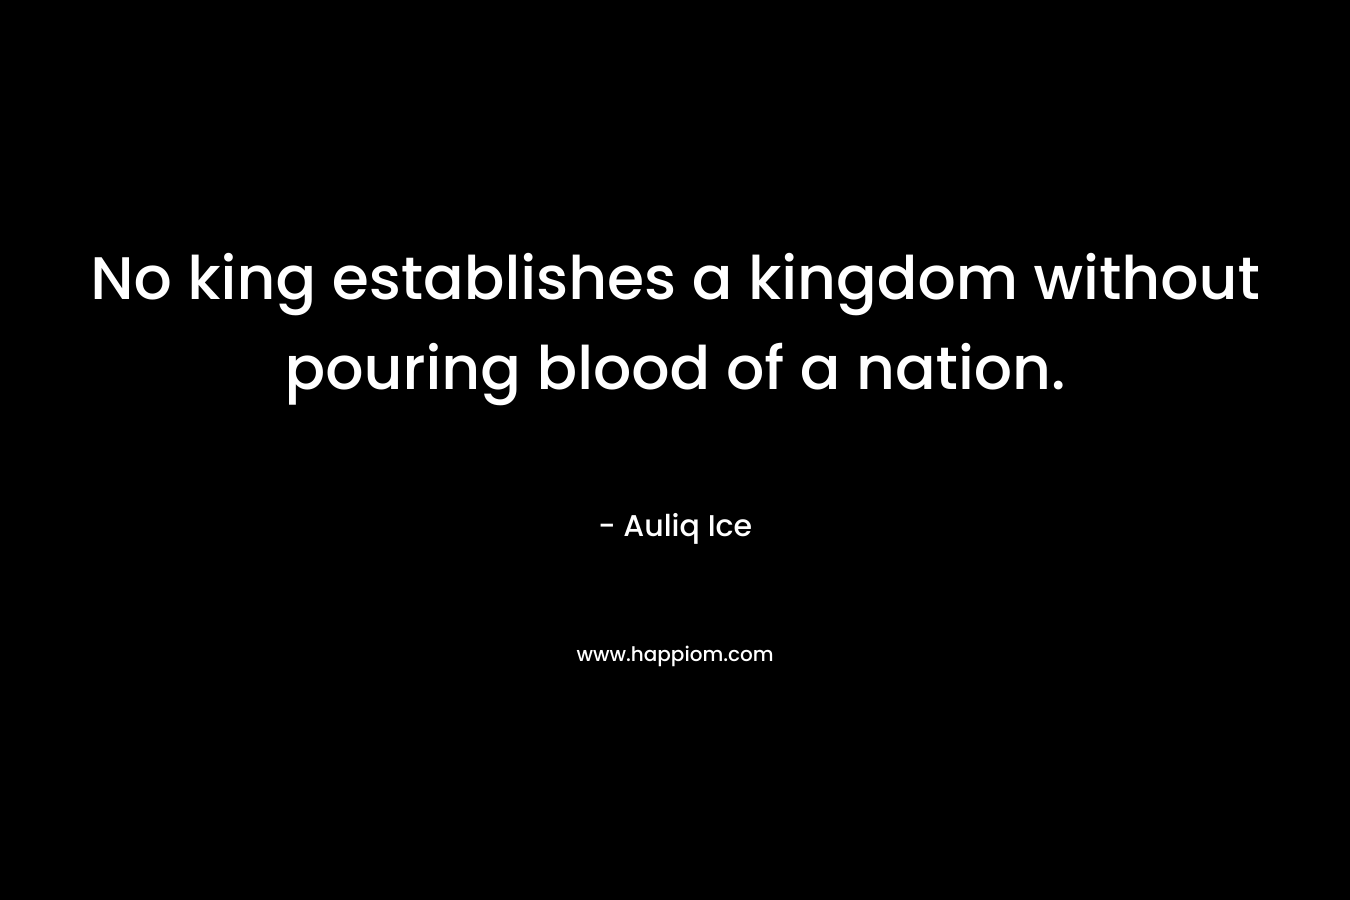 No king establishes a kingdom without pouring blood of a nation. – Auliq Ice